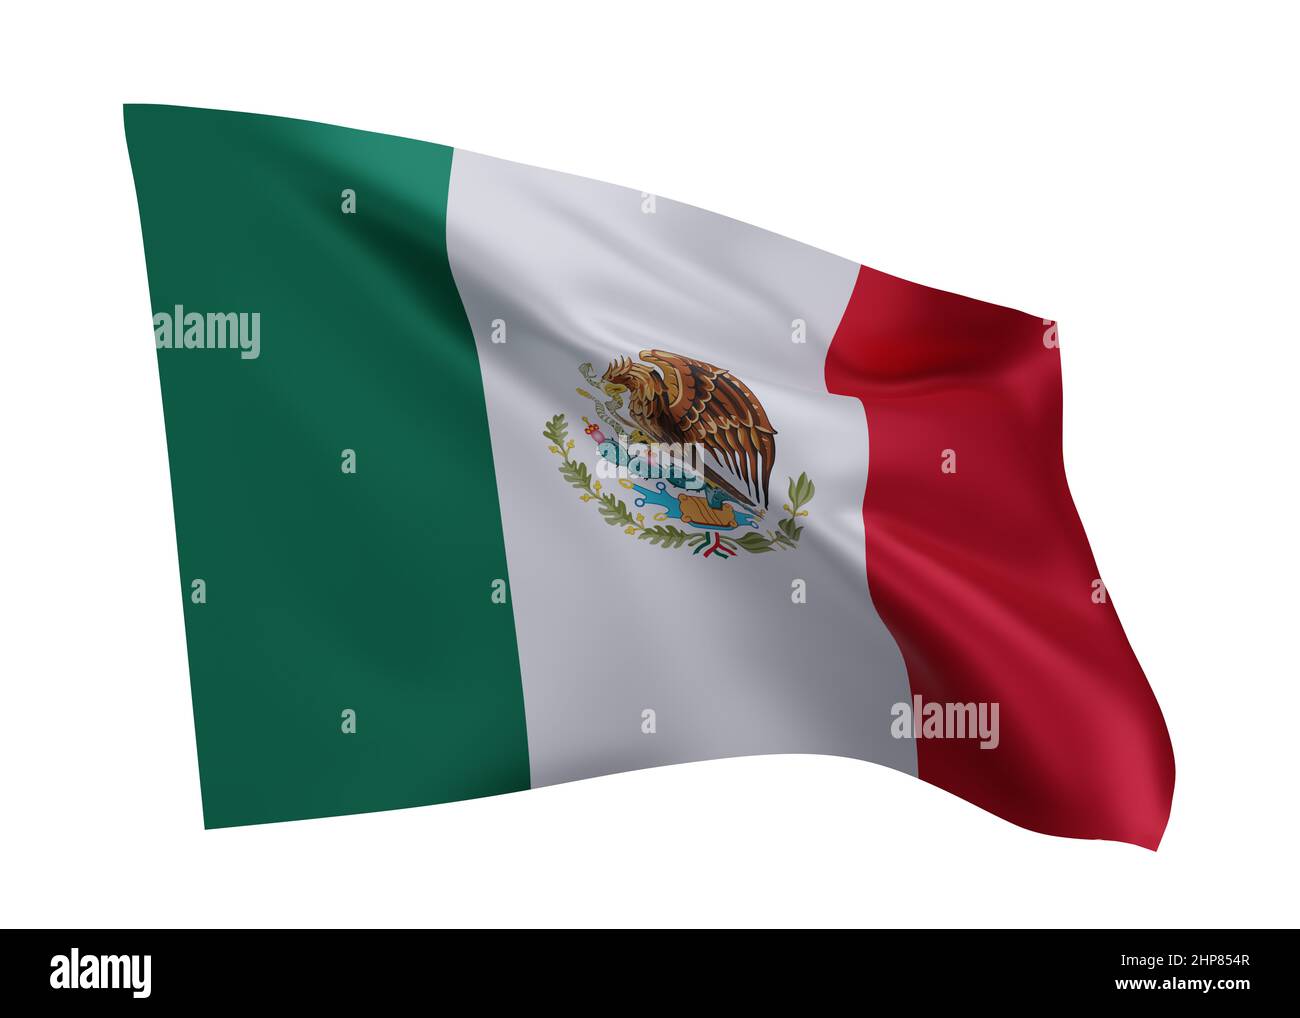 3d illustration flag of Mexico. Mexican high resolution flag isolated against white background. 3d rendering Stock Photo